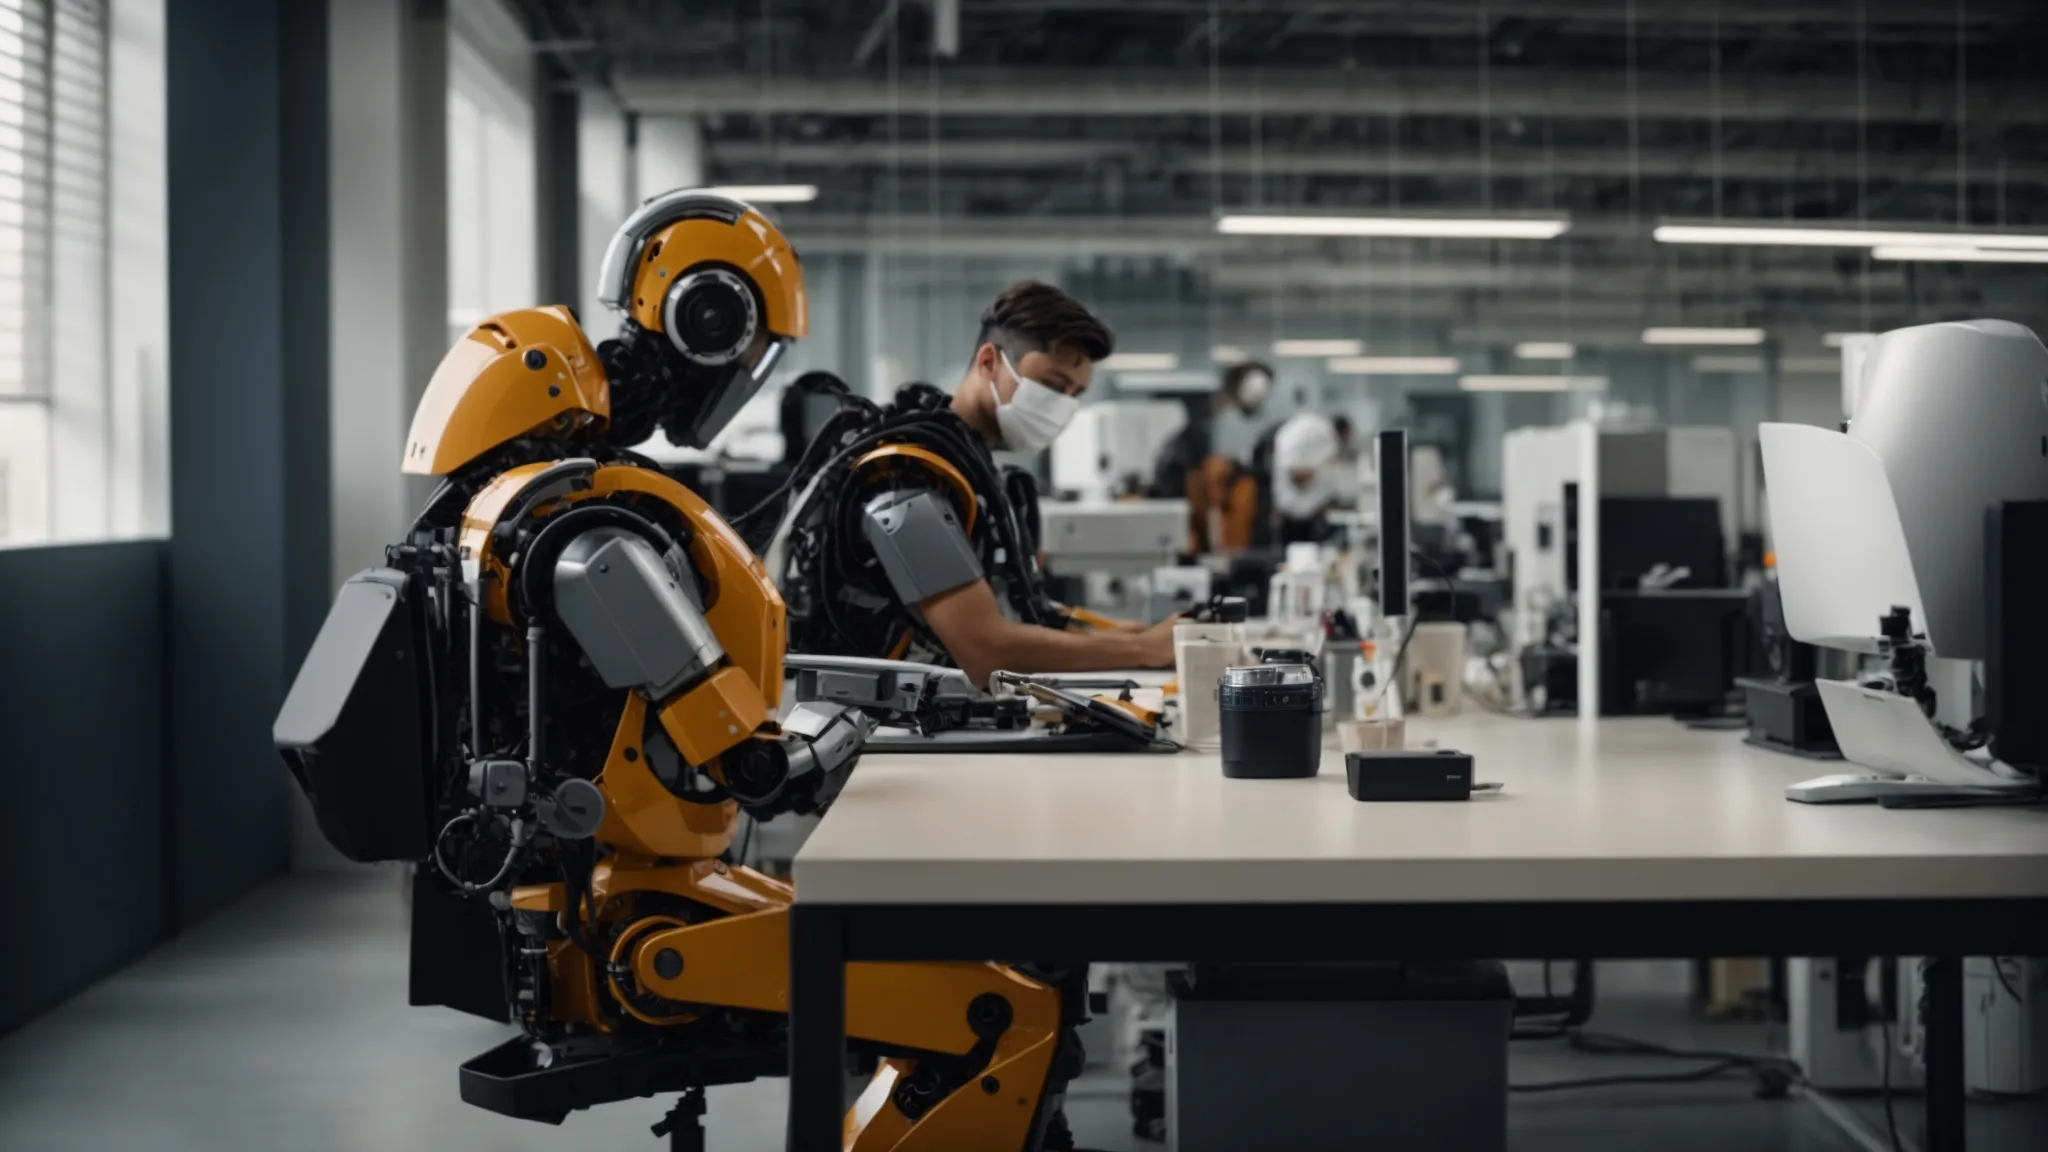 a human and a robot working side by side in a modern office, each engaging with different tasks.